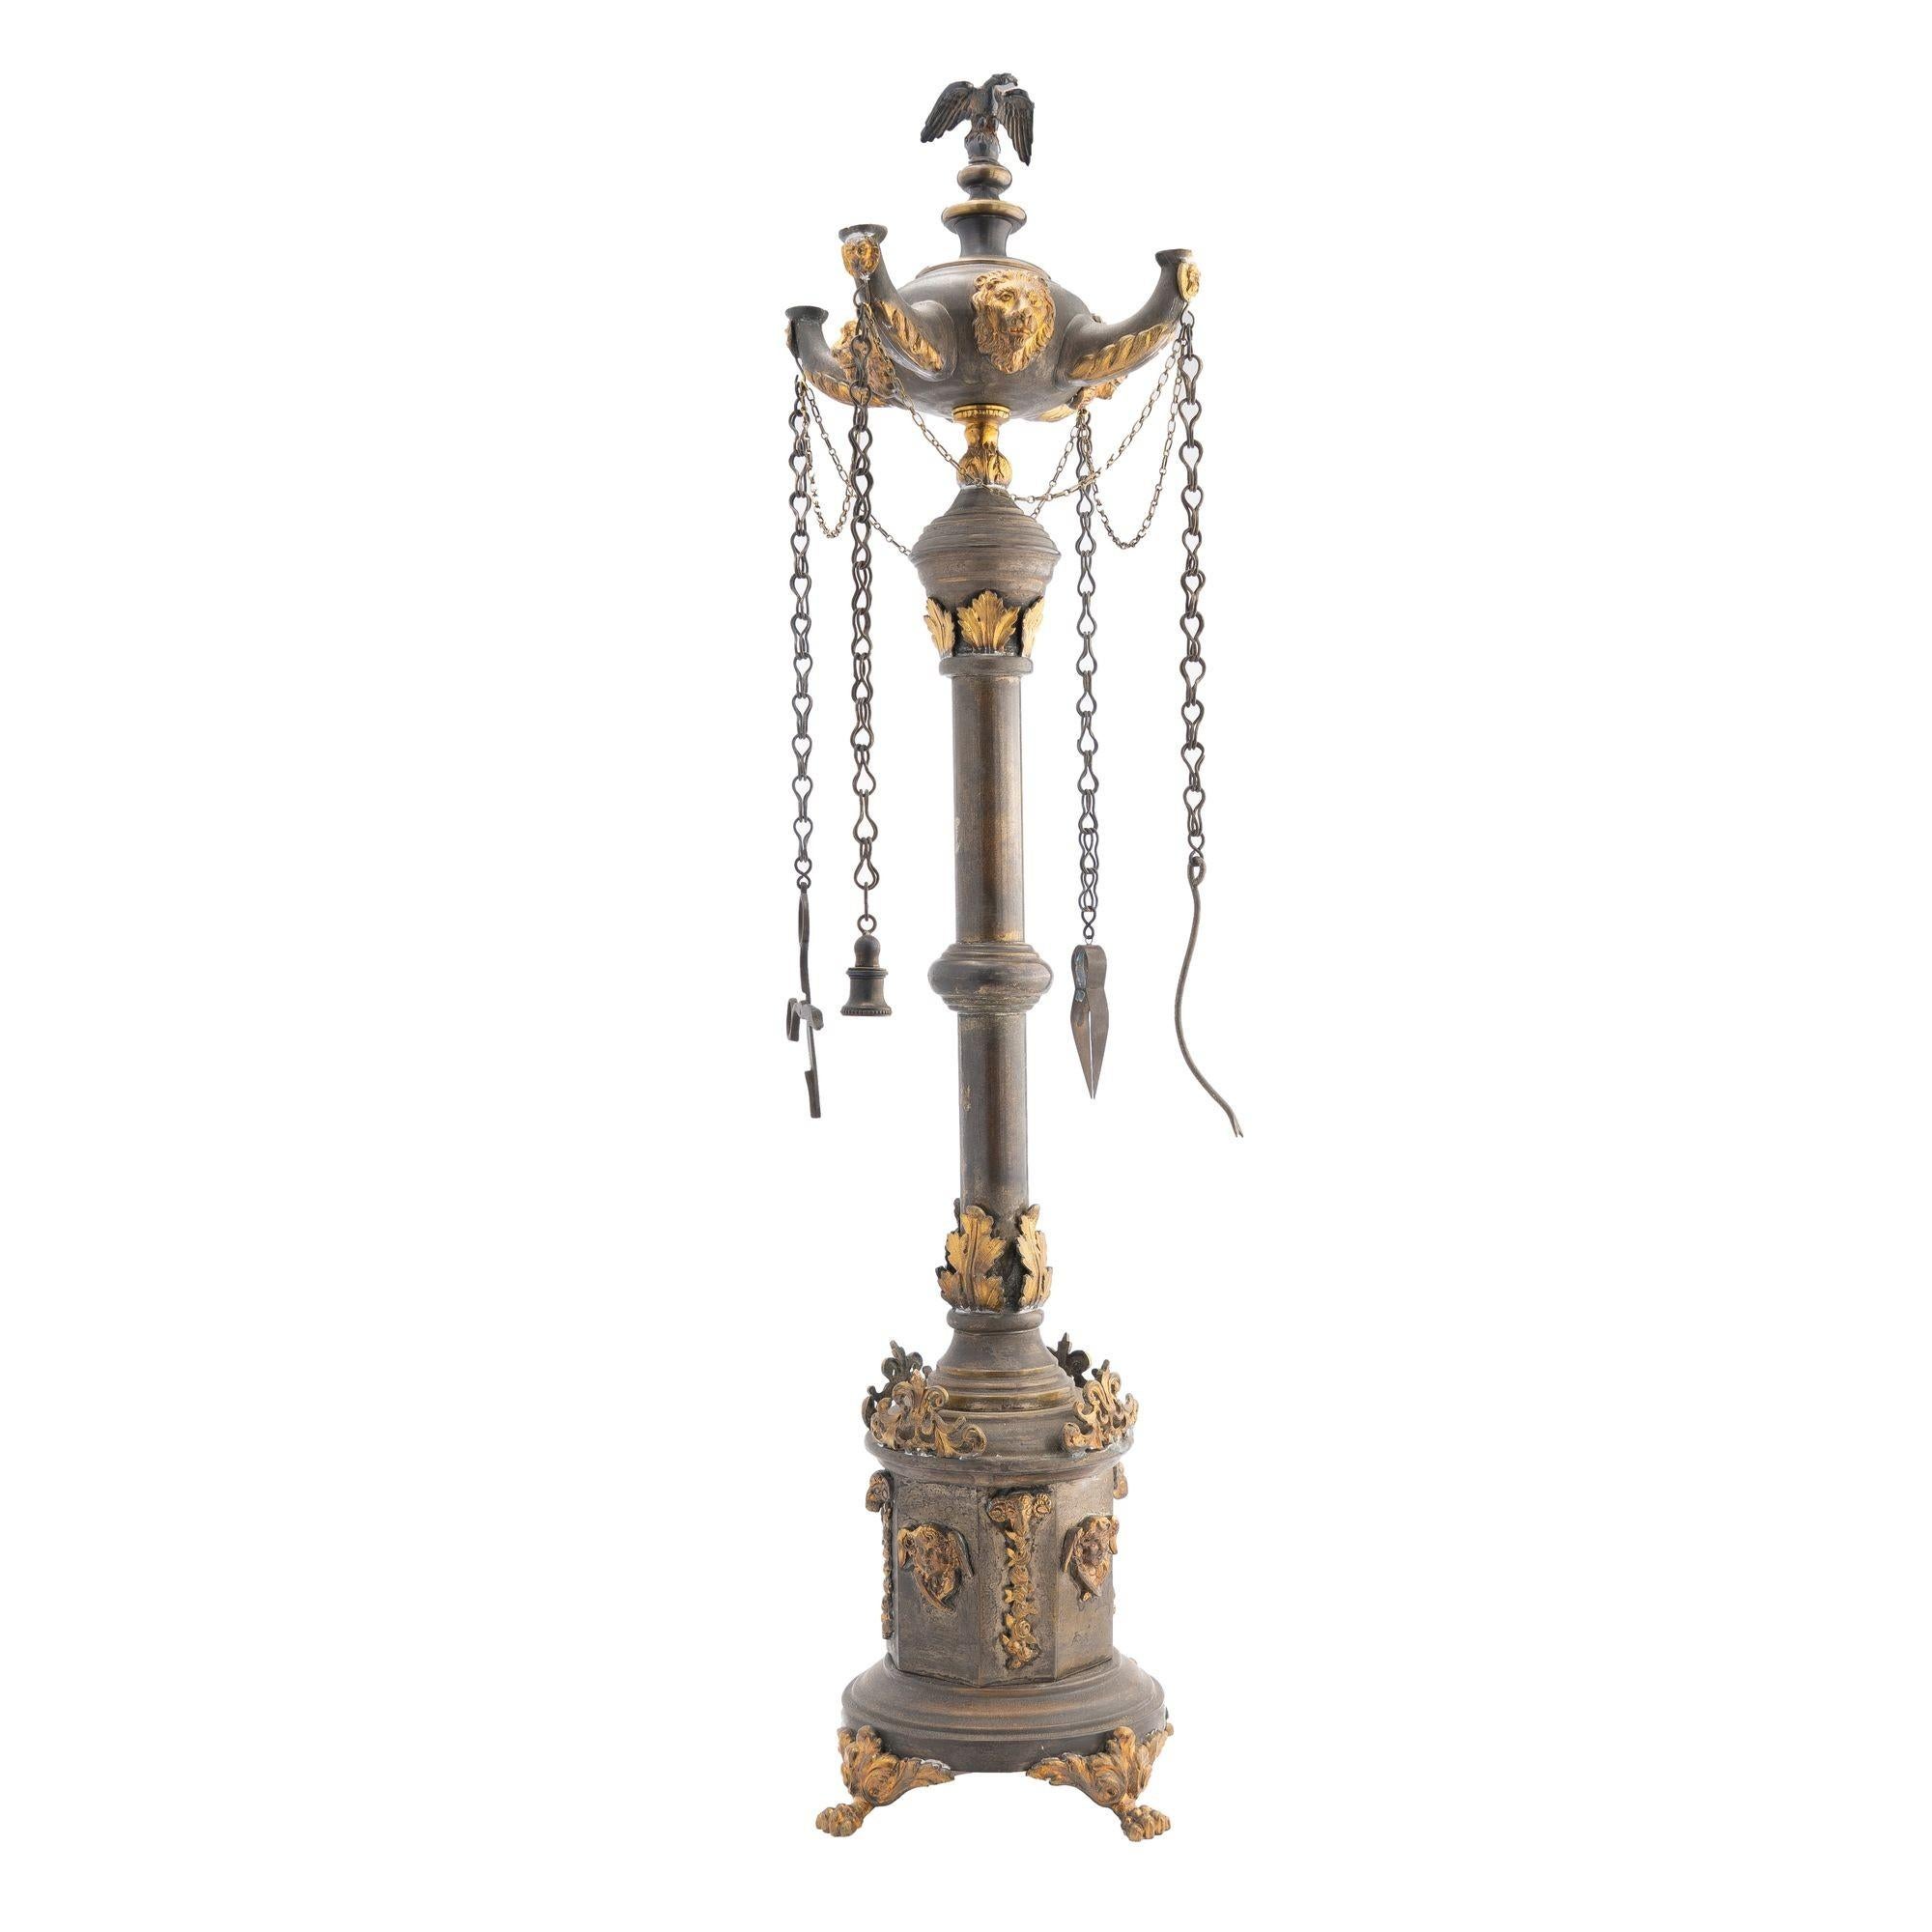 Cast and stamped brass columnar Lucerne lamp with oxidized and contrasting gilt embellishments. The lamp is designed after Roman columnar monument, mounted with a four spout oil font with cover bearing an eagle and four hanging wick implements. The